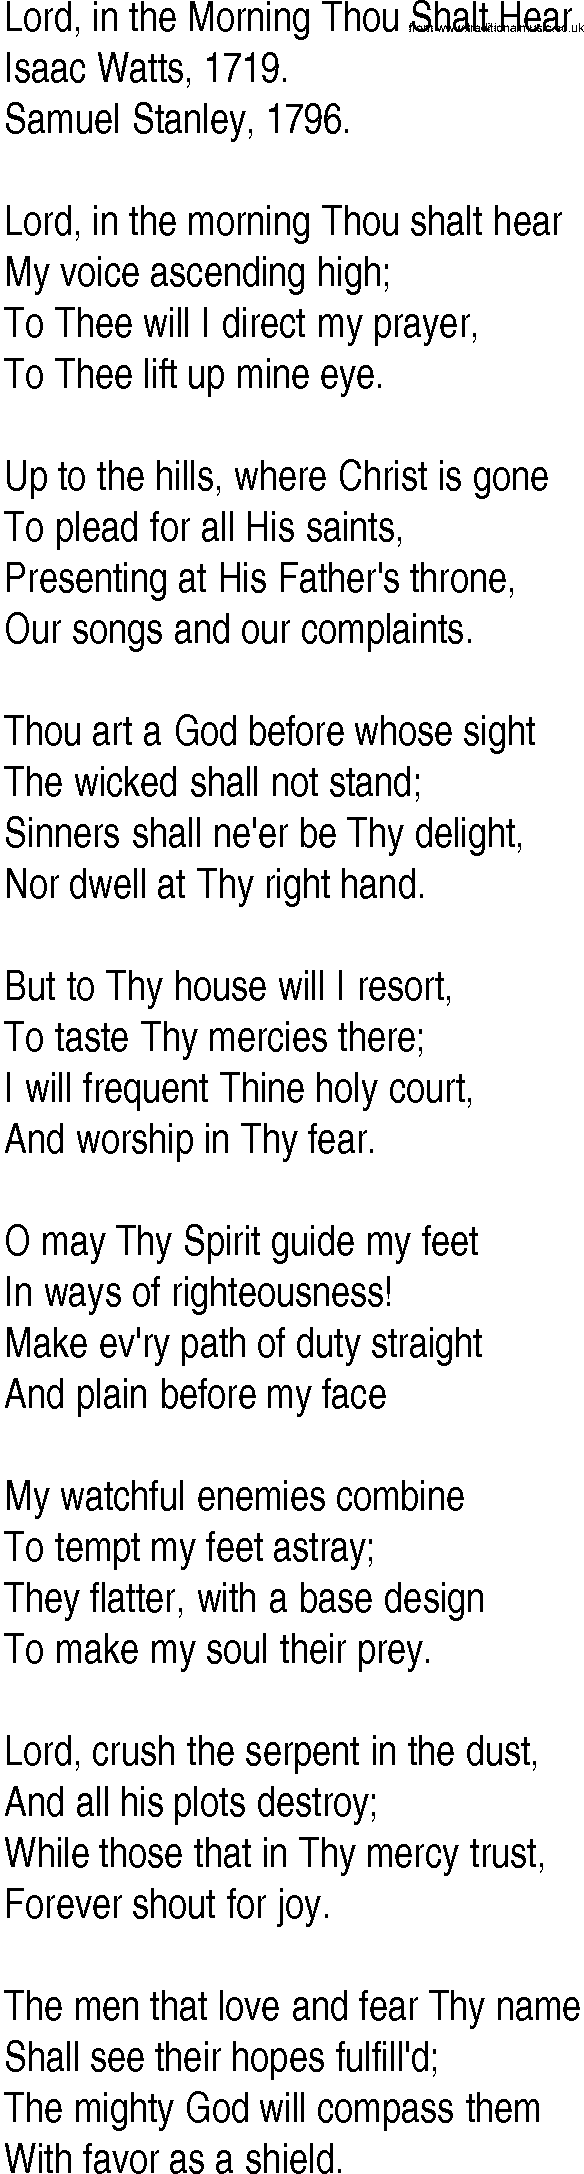 Hymn and Gospel Song: Lord, in the Morning Thou Shalt Hear by Isaac Watts lyrics